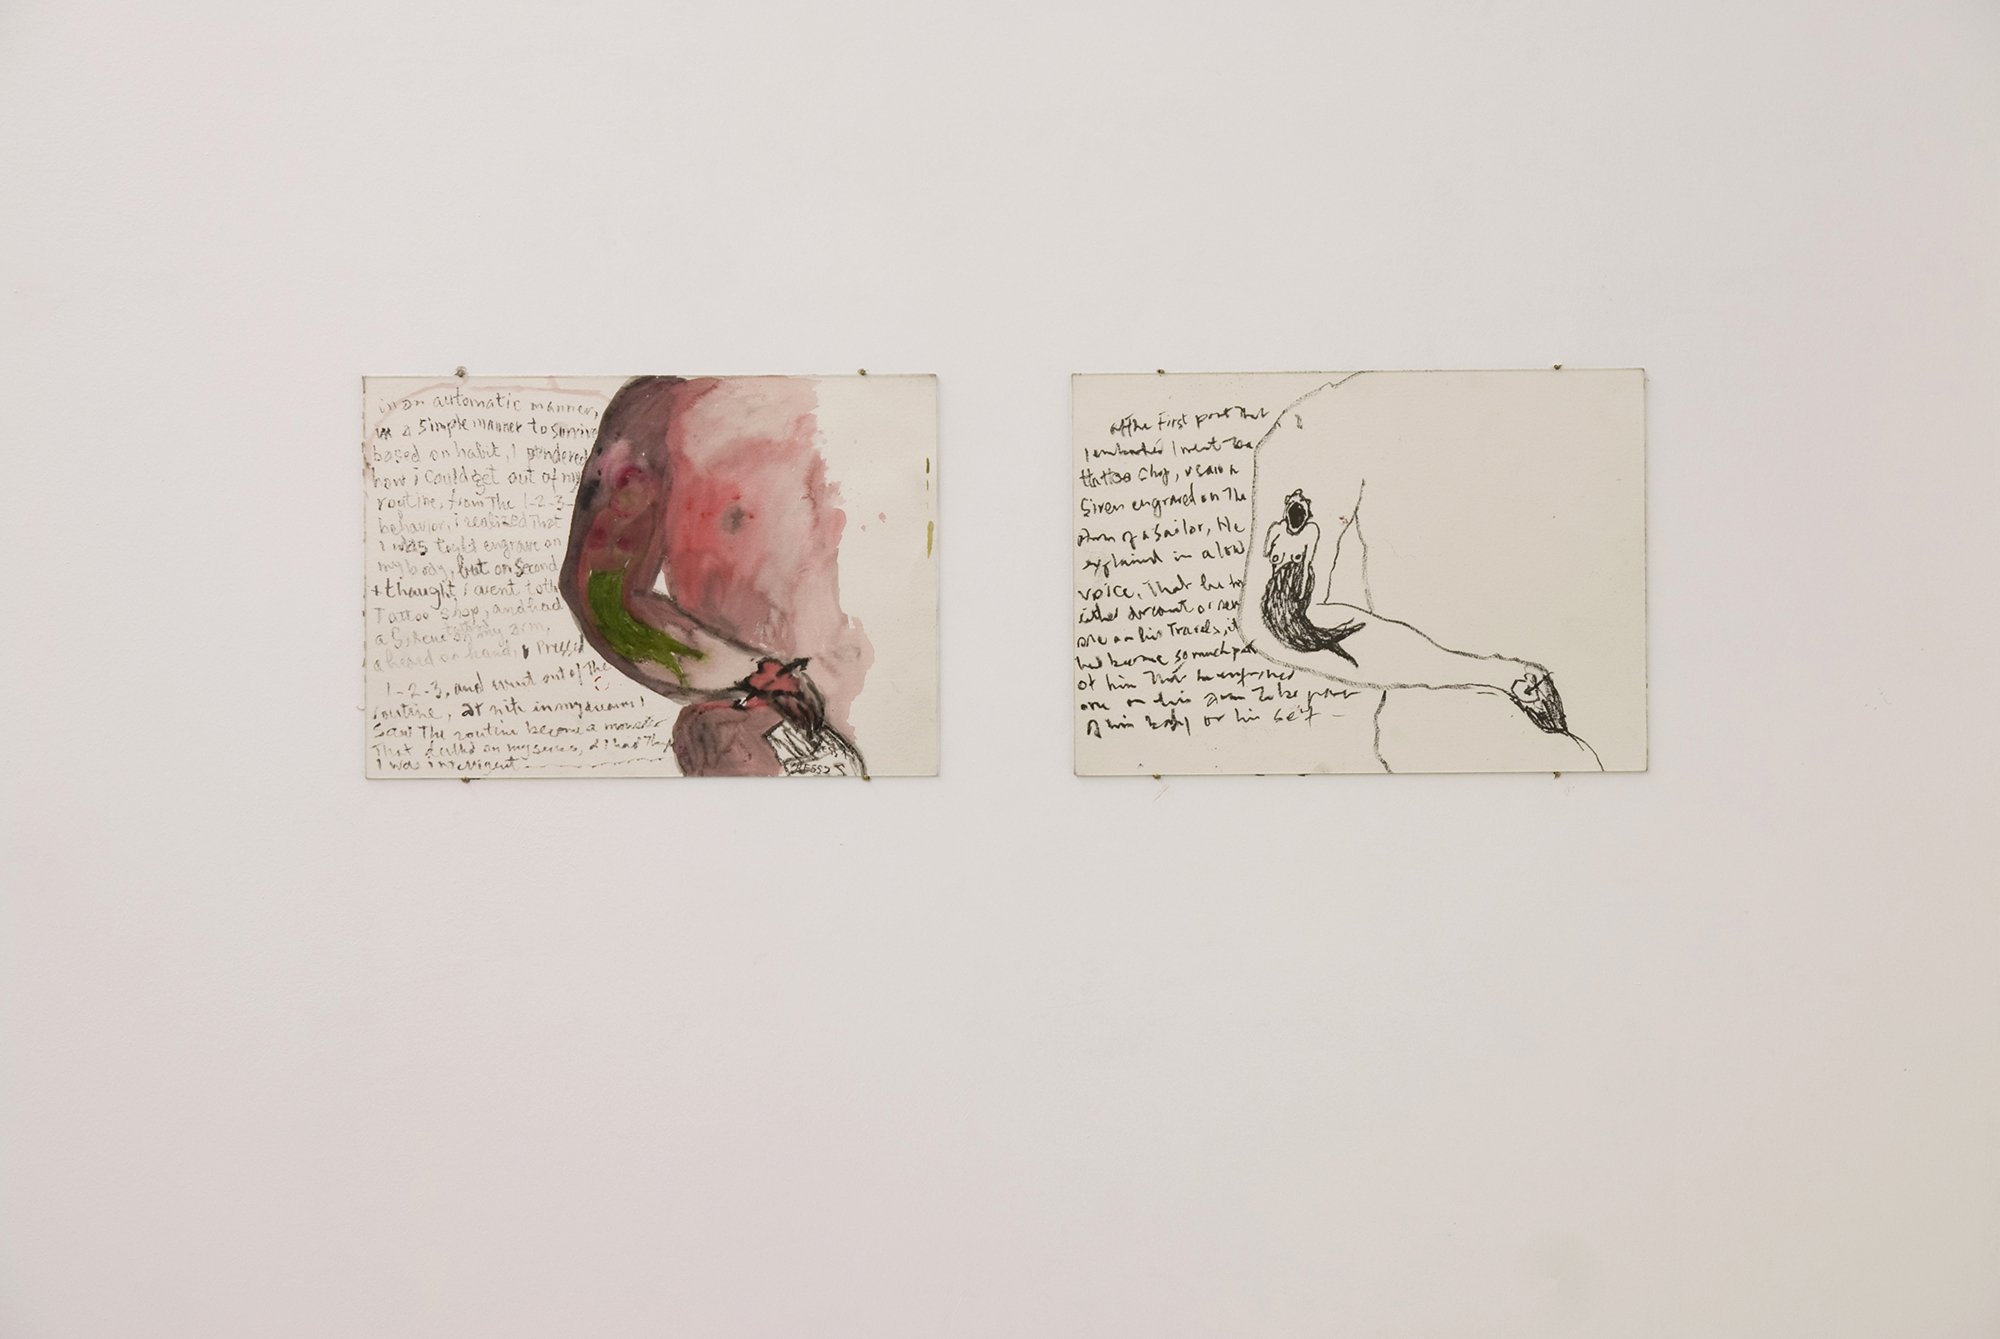 Anna Boghiguian, I sowed gardens in my soul, I drew gardens on my body, I had my nightmares engraved on my face, I cried and I laughed, I became part of humanity, wax and watercolors on paper, 42 x 29.5cm, 2009. Installation view, Hand in Hand, Rodeo, Istanbul, 2009 – 2010